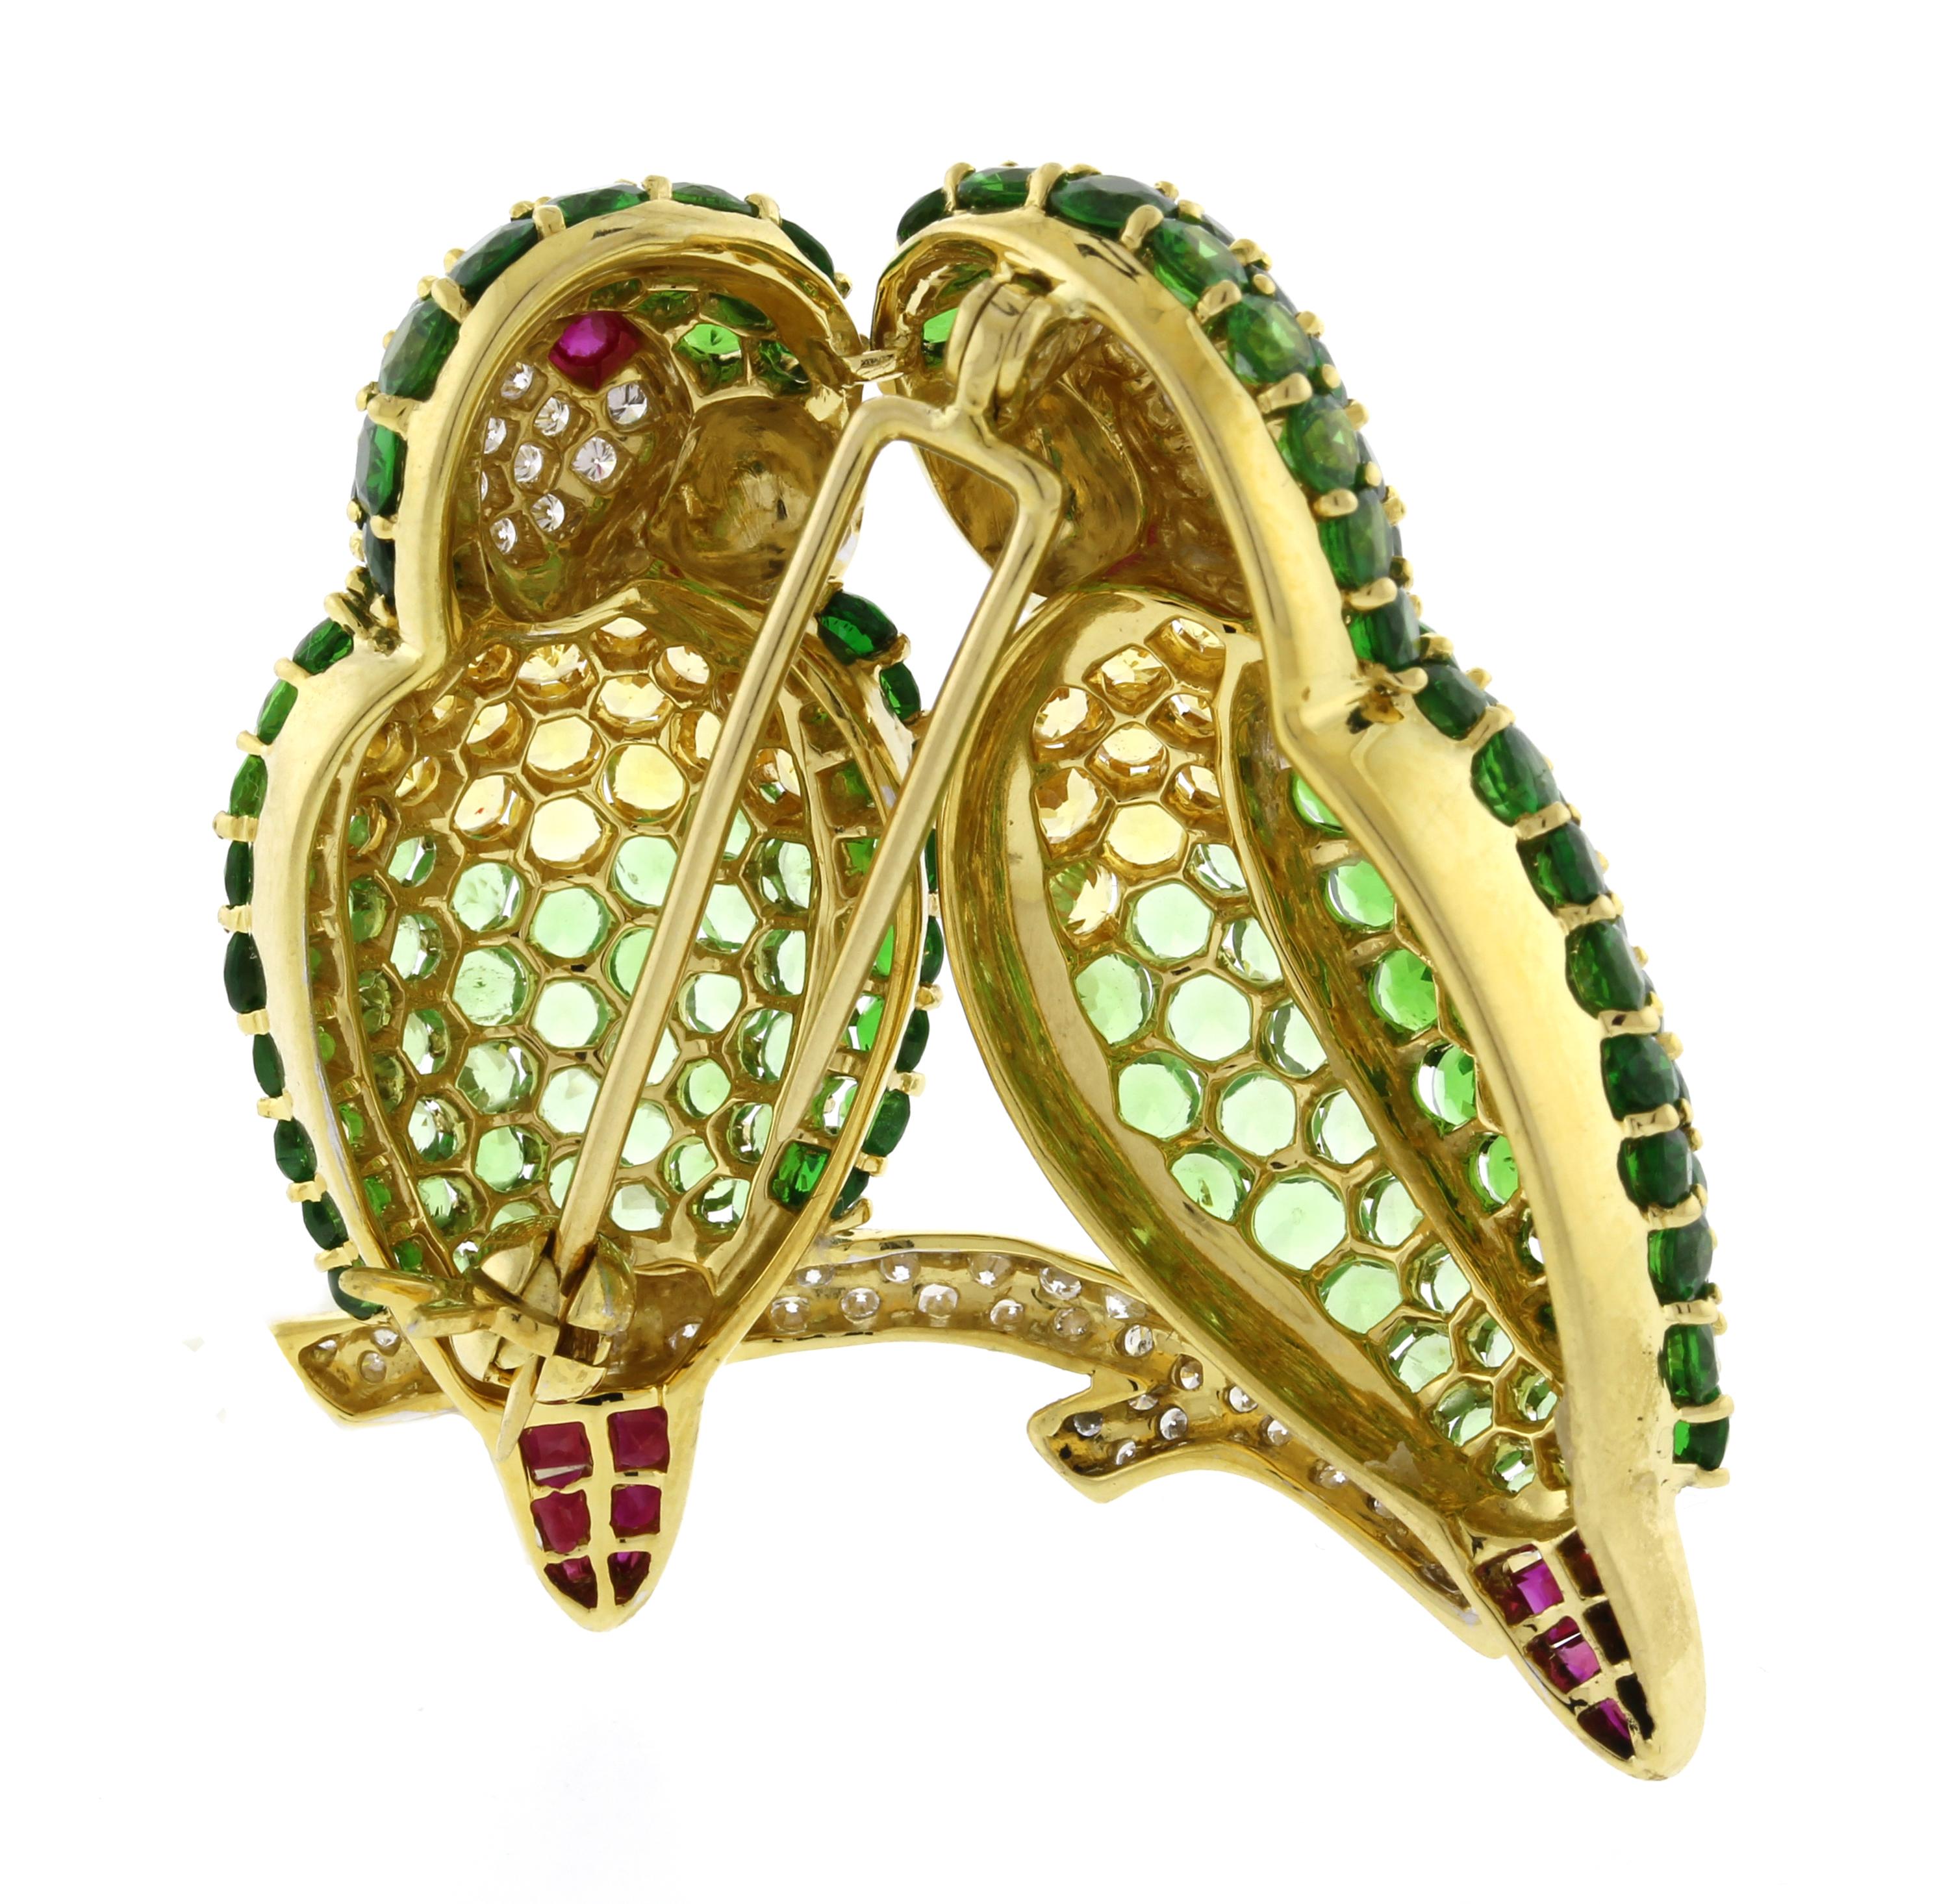 This brooch was meticulously crafted with attention to detail using an array of gemstones including diamonds, tsavorites, light green and yellow sapphires, and rubies.
♦ Metal: 18 Karat Yellow Gold
♦ Circa 1990s
♦ Gemstone approximate weights: